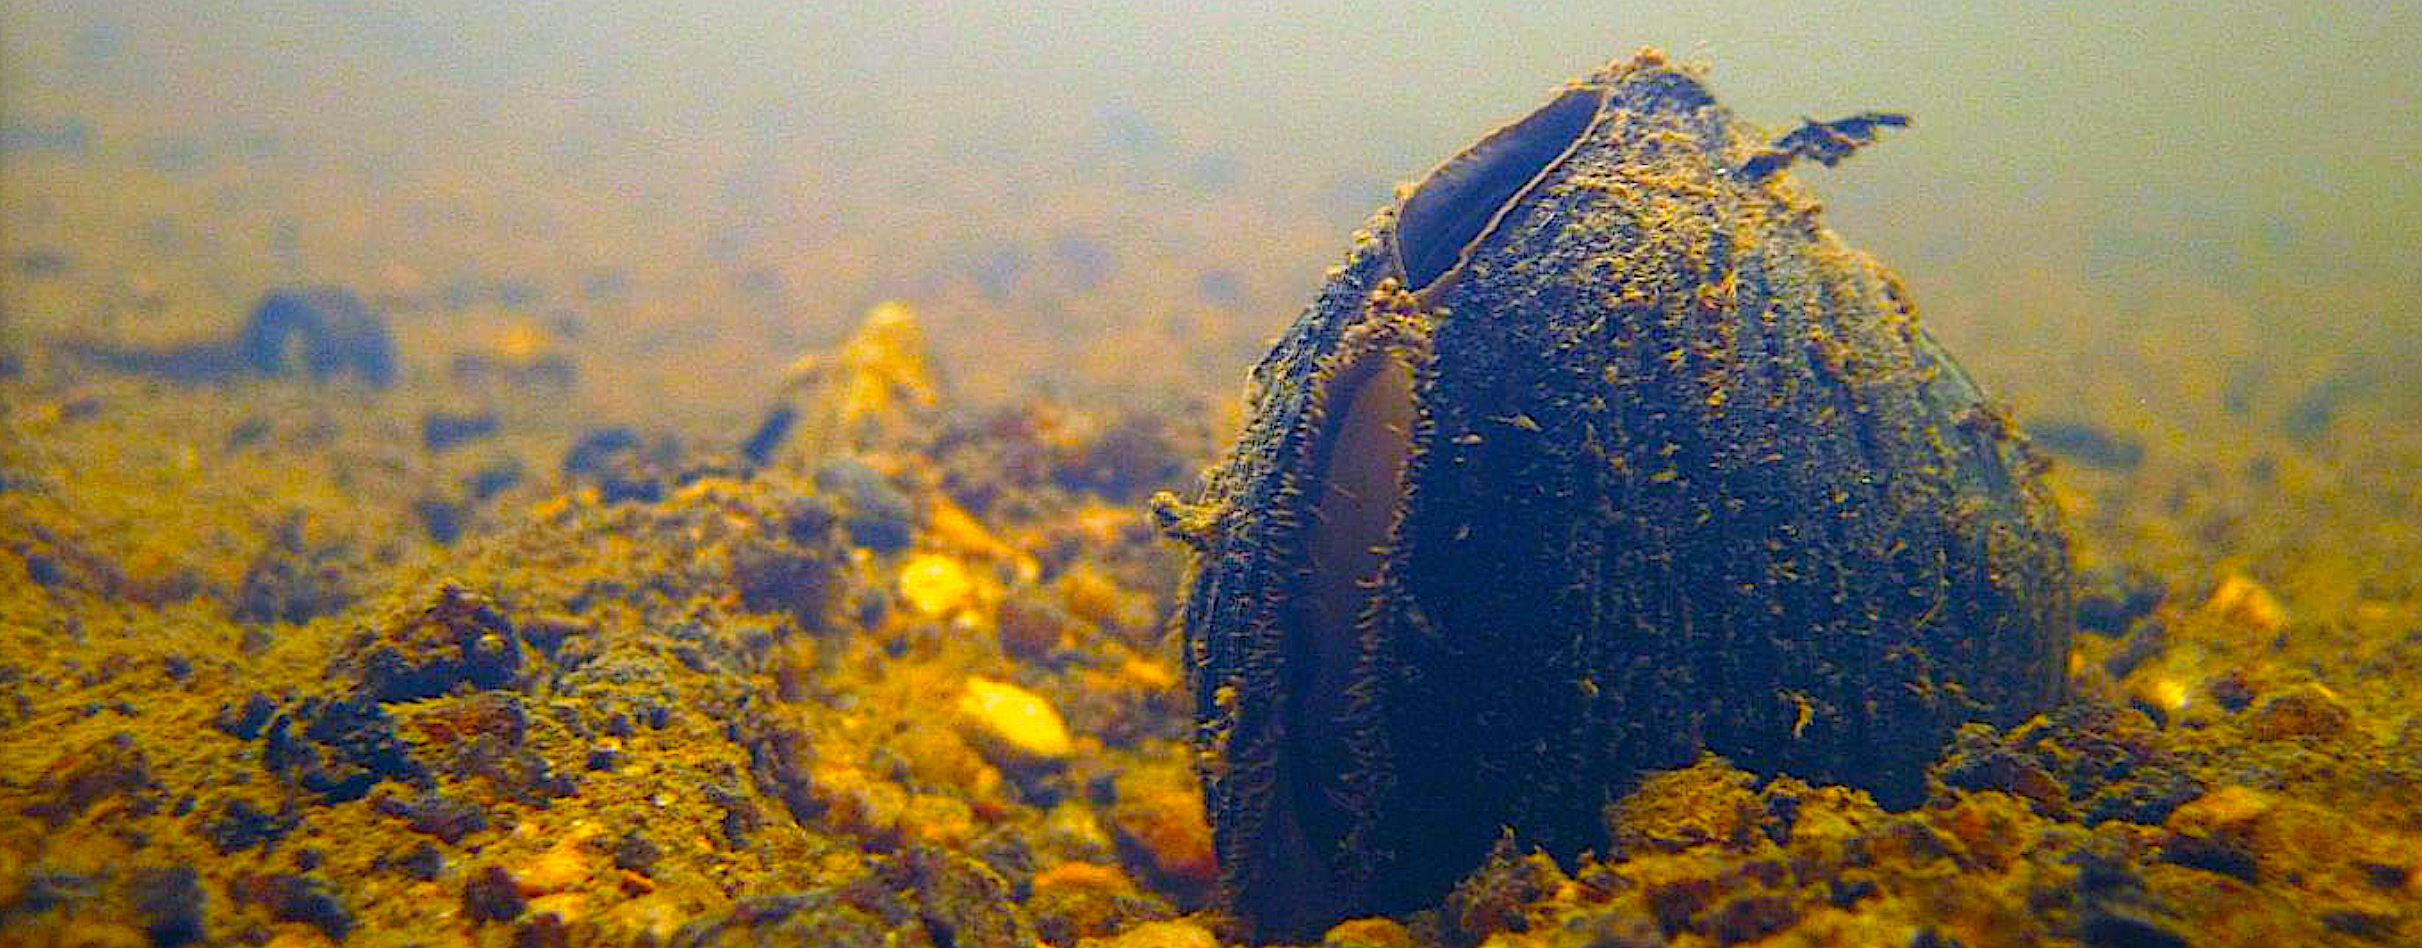 A new project to create an innovative visitor display at the Greensboro Science Center on endangered freshwater mussels in one of six Community Collaborative Research Grant initiatives that launch this year. Carolina heelsplitter, courtesy of USFWS.